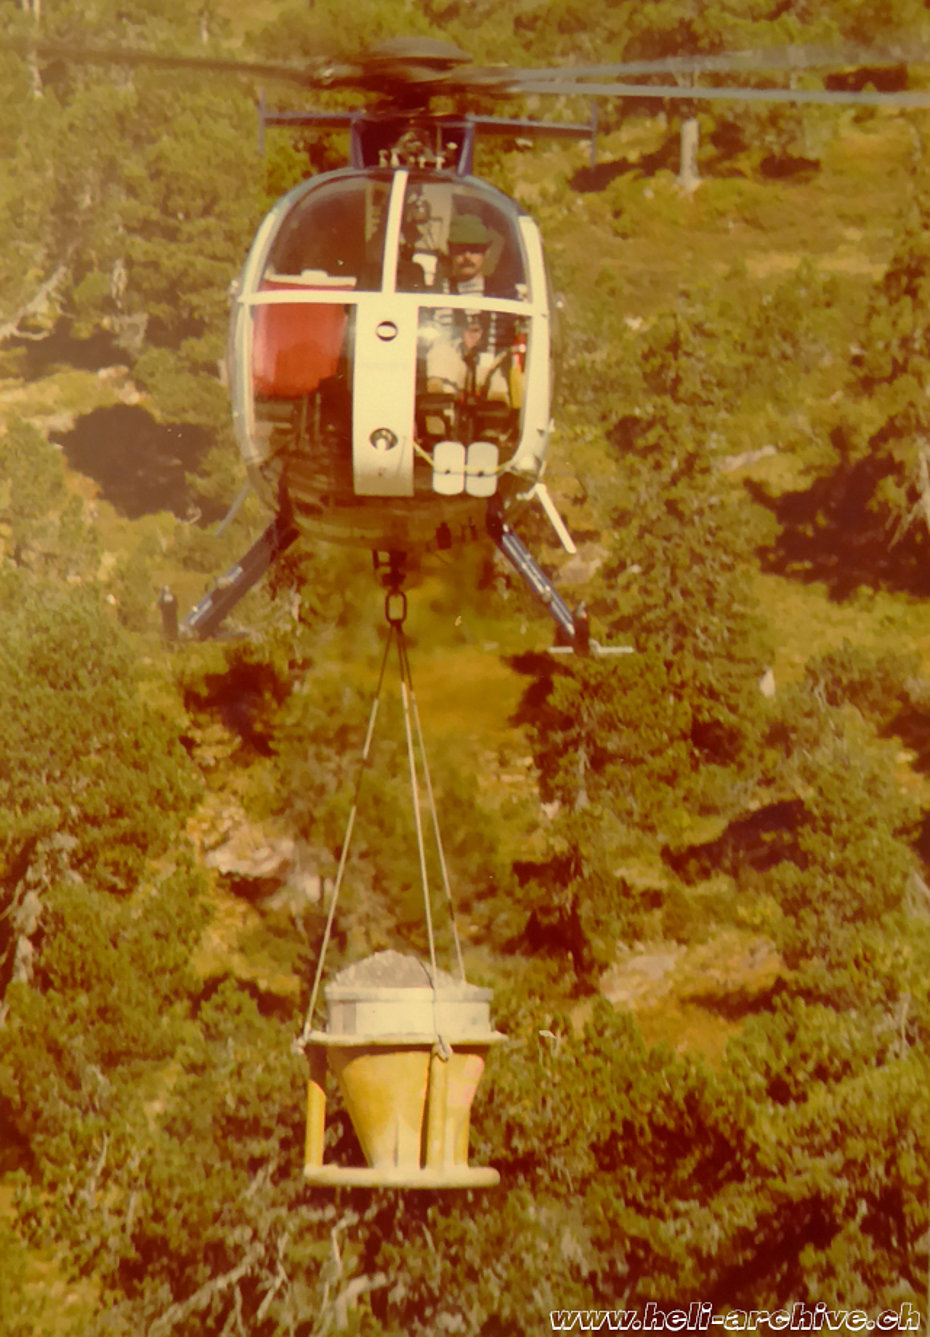 1977 - Peter Kolesnik at the controls of the Hughes 500D HB-XFR loaned by Fuchs Helikopter trasports gravel for a mountain construction site (family Kolesnik)